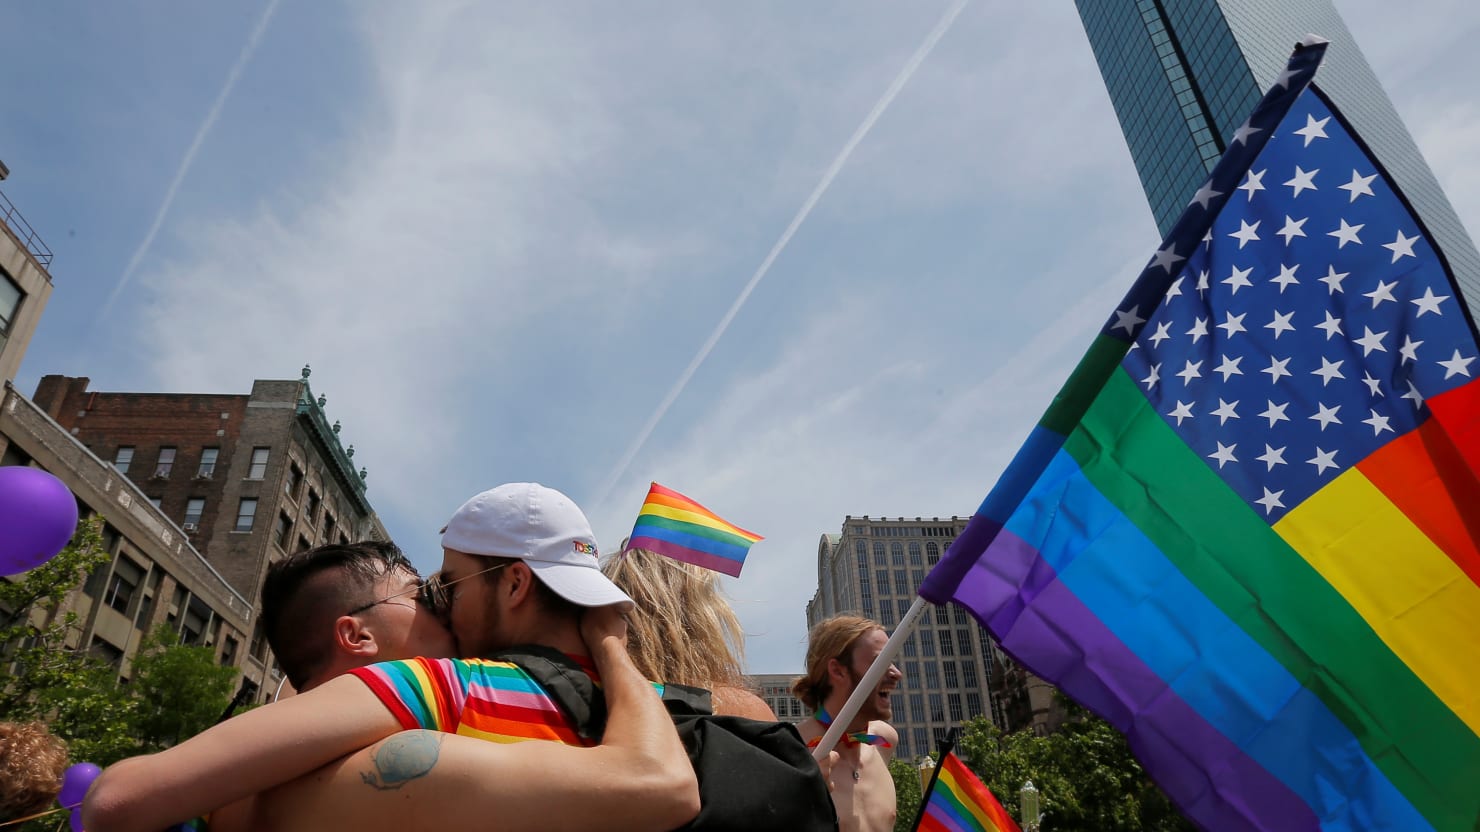 City Officials Approve Application for Boston’s ‘Straight Pride Parade’